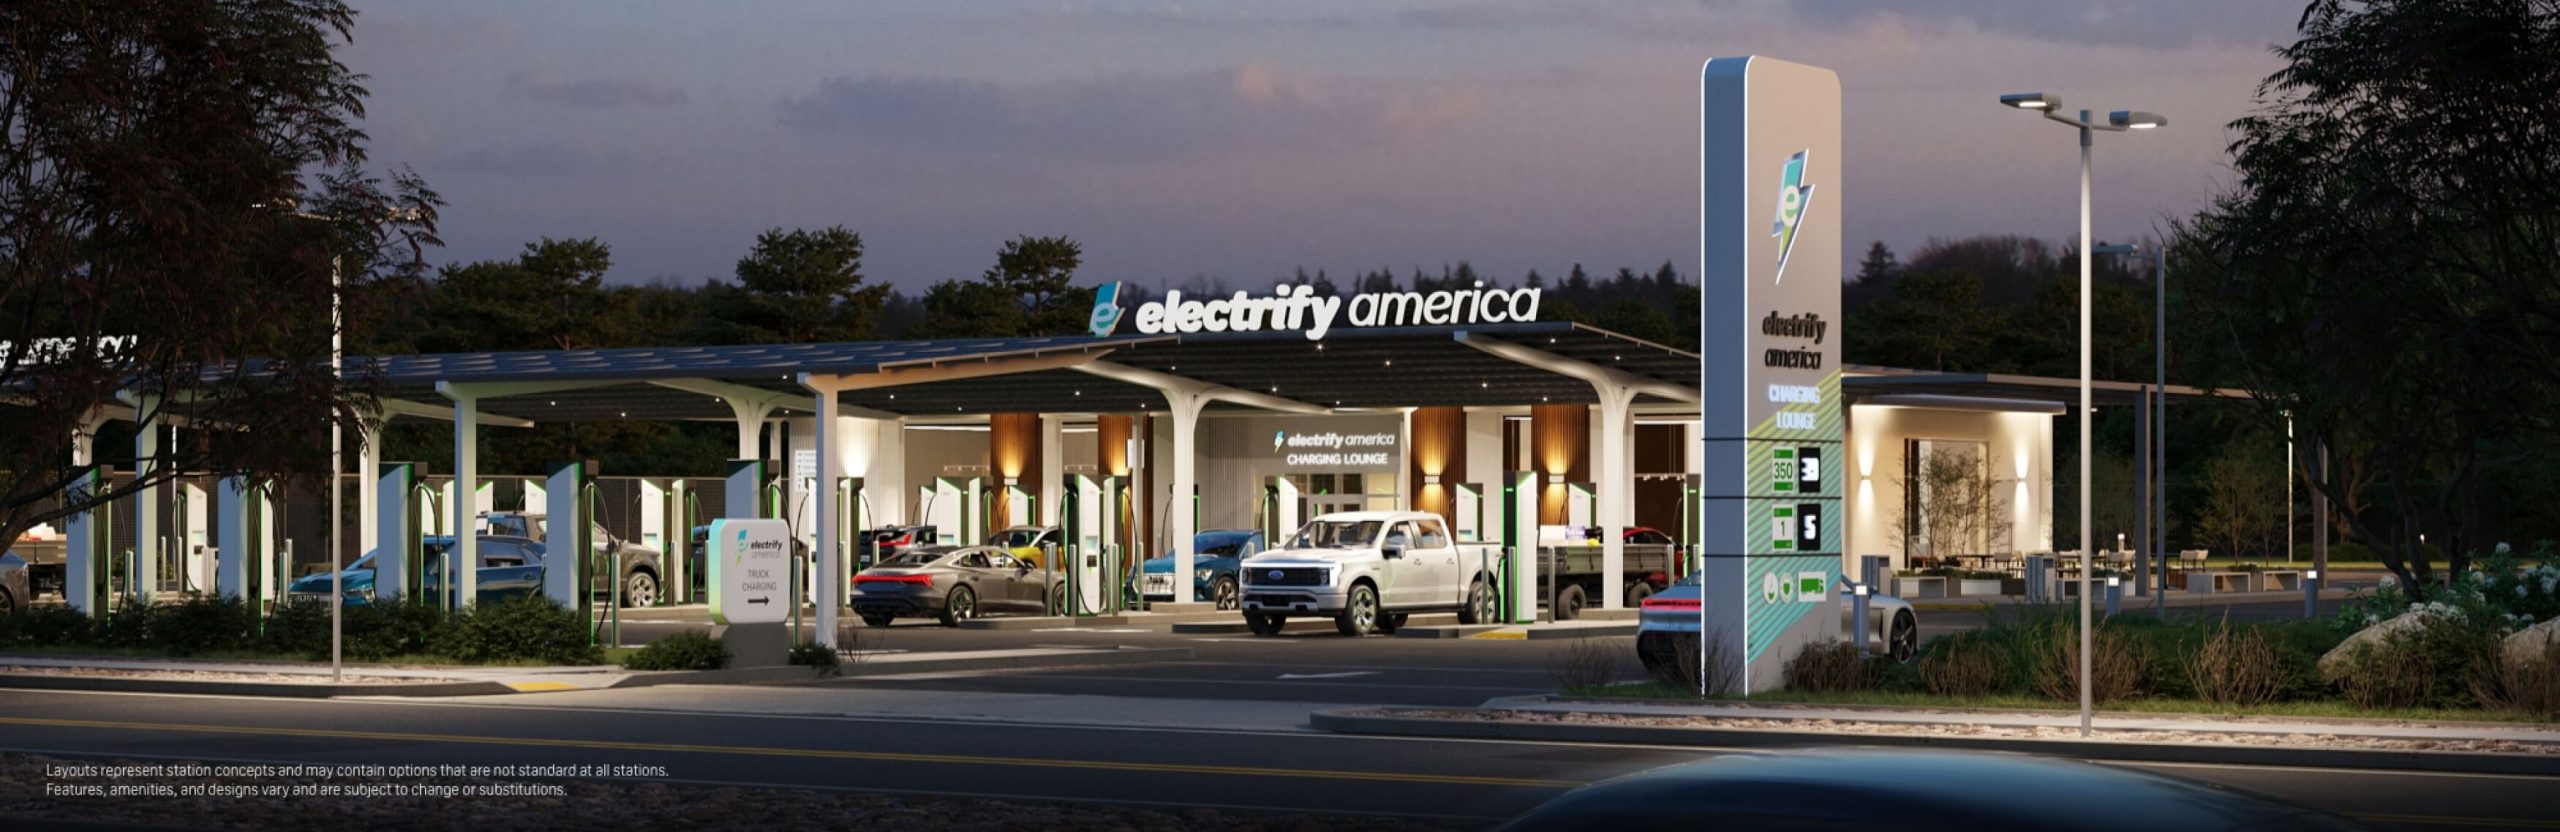 Electrify America's new plans for EV charging stations look like a hybrid between a gas station and an Apple Store.